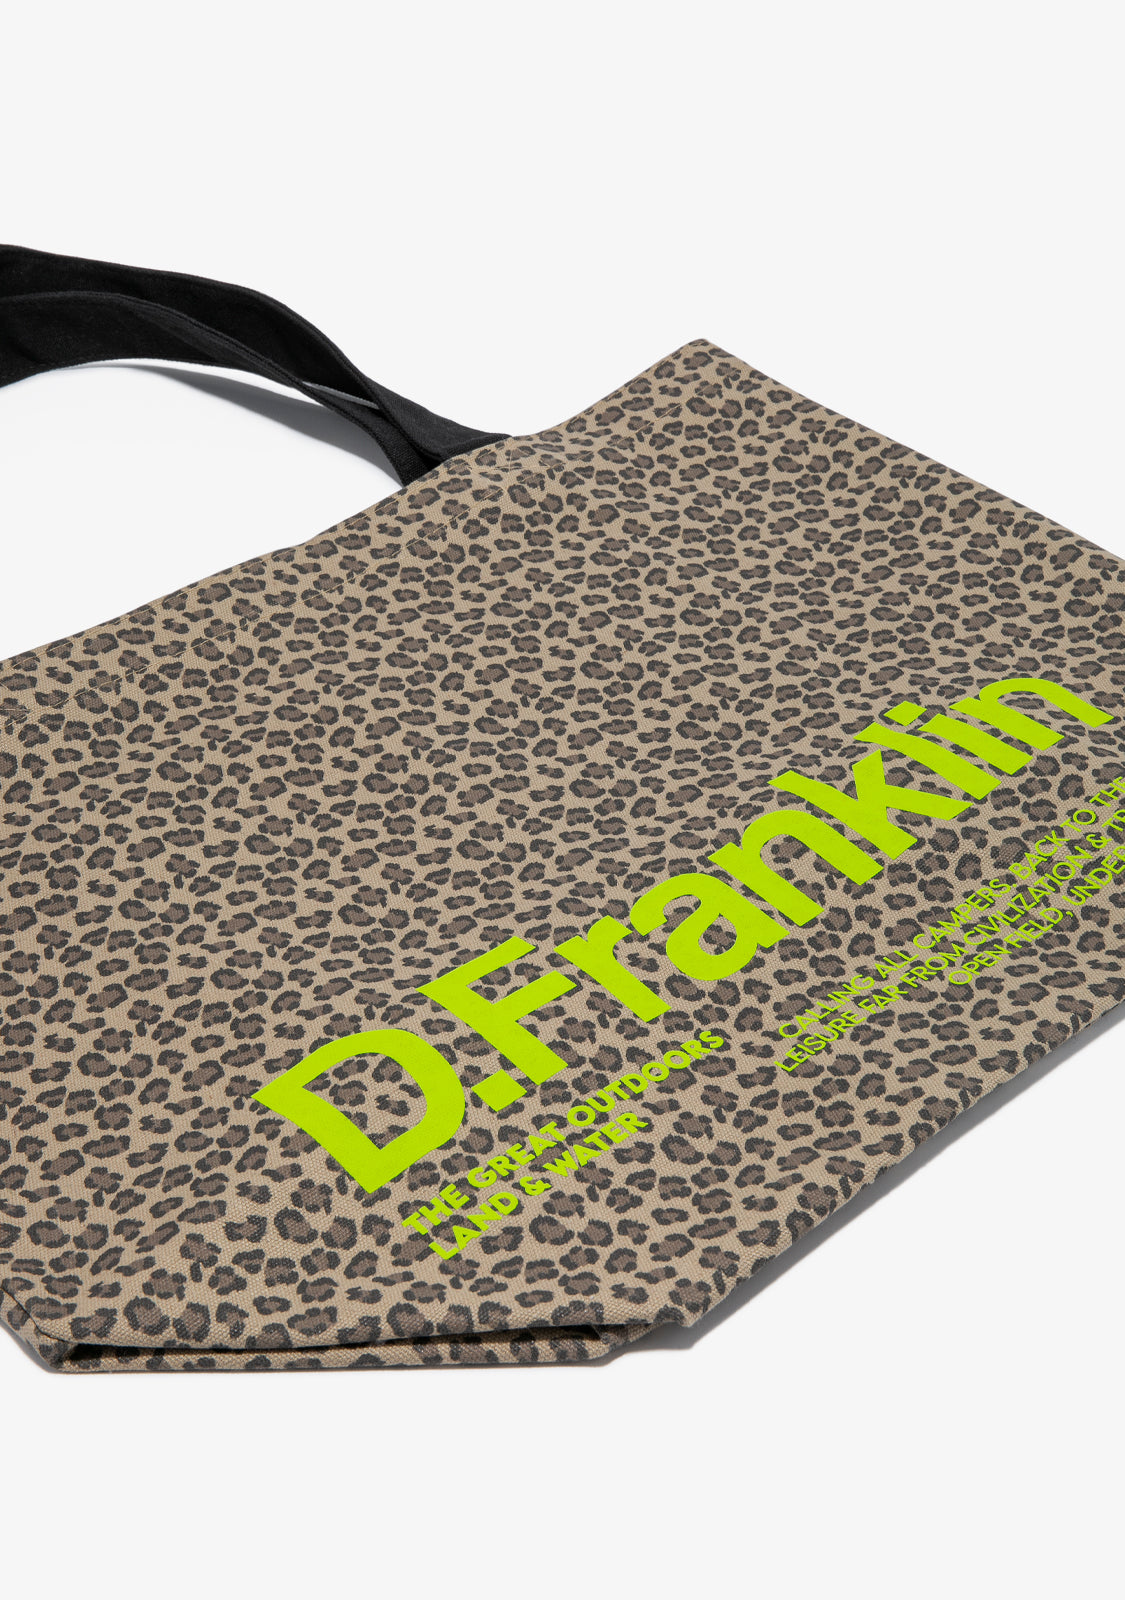 Tote Bag Leopard / Yellow